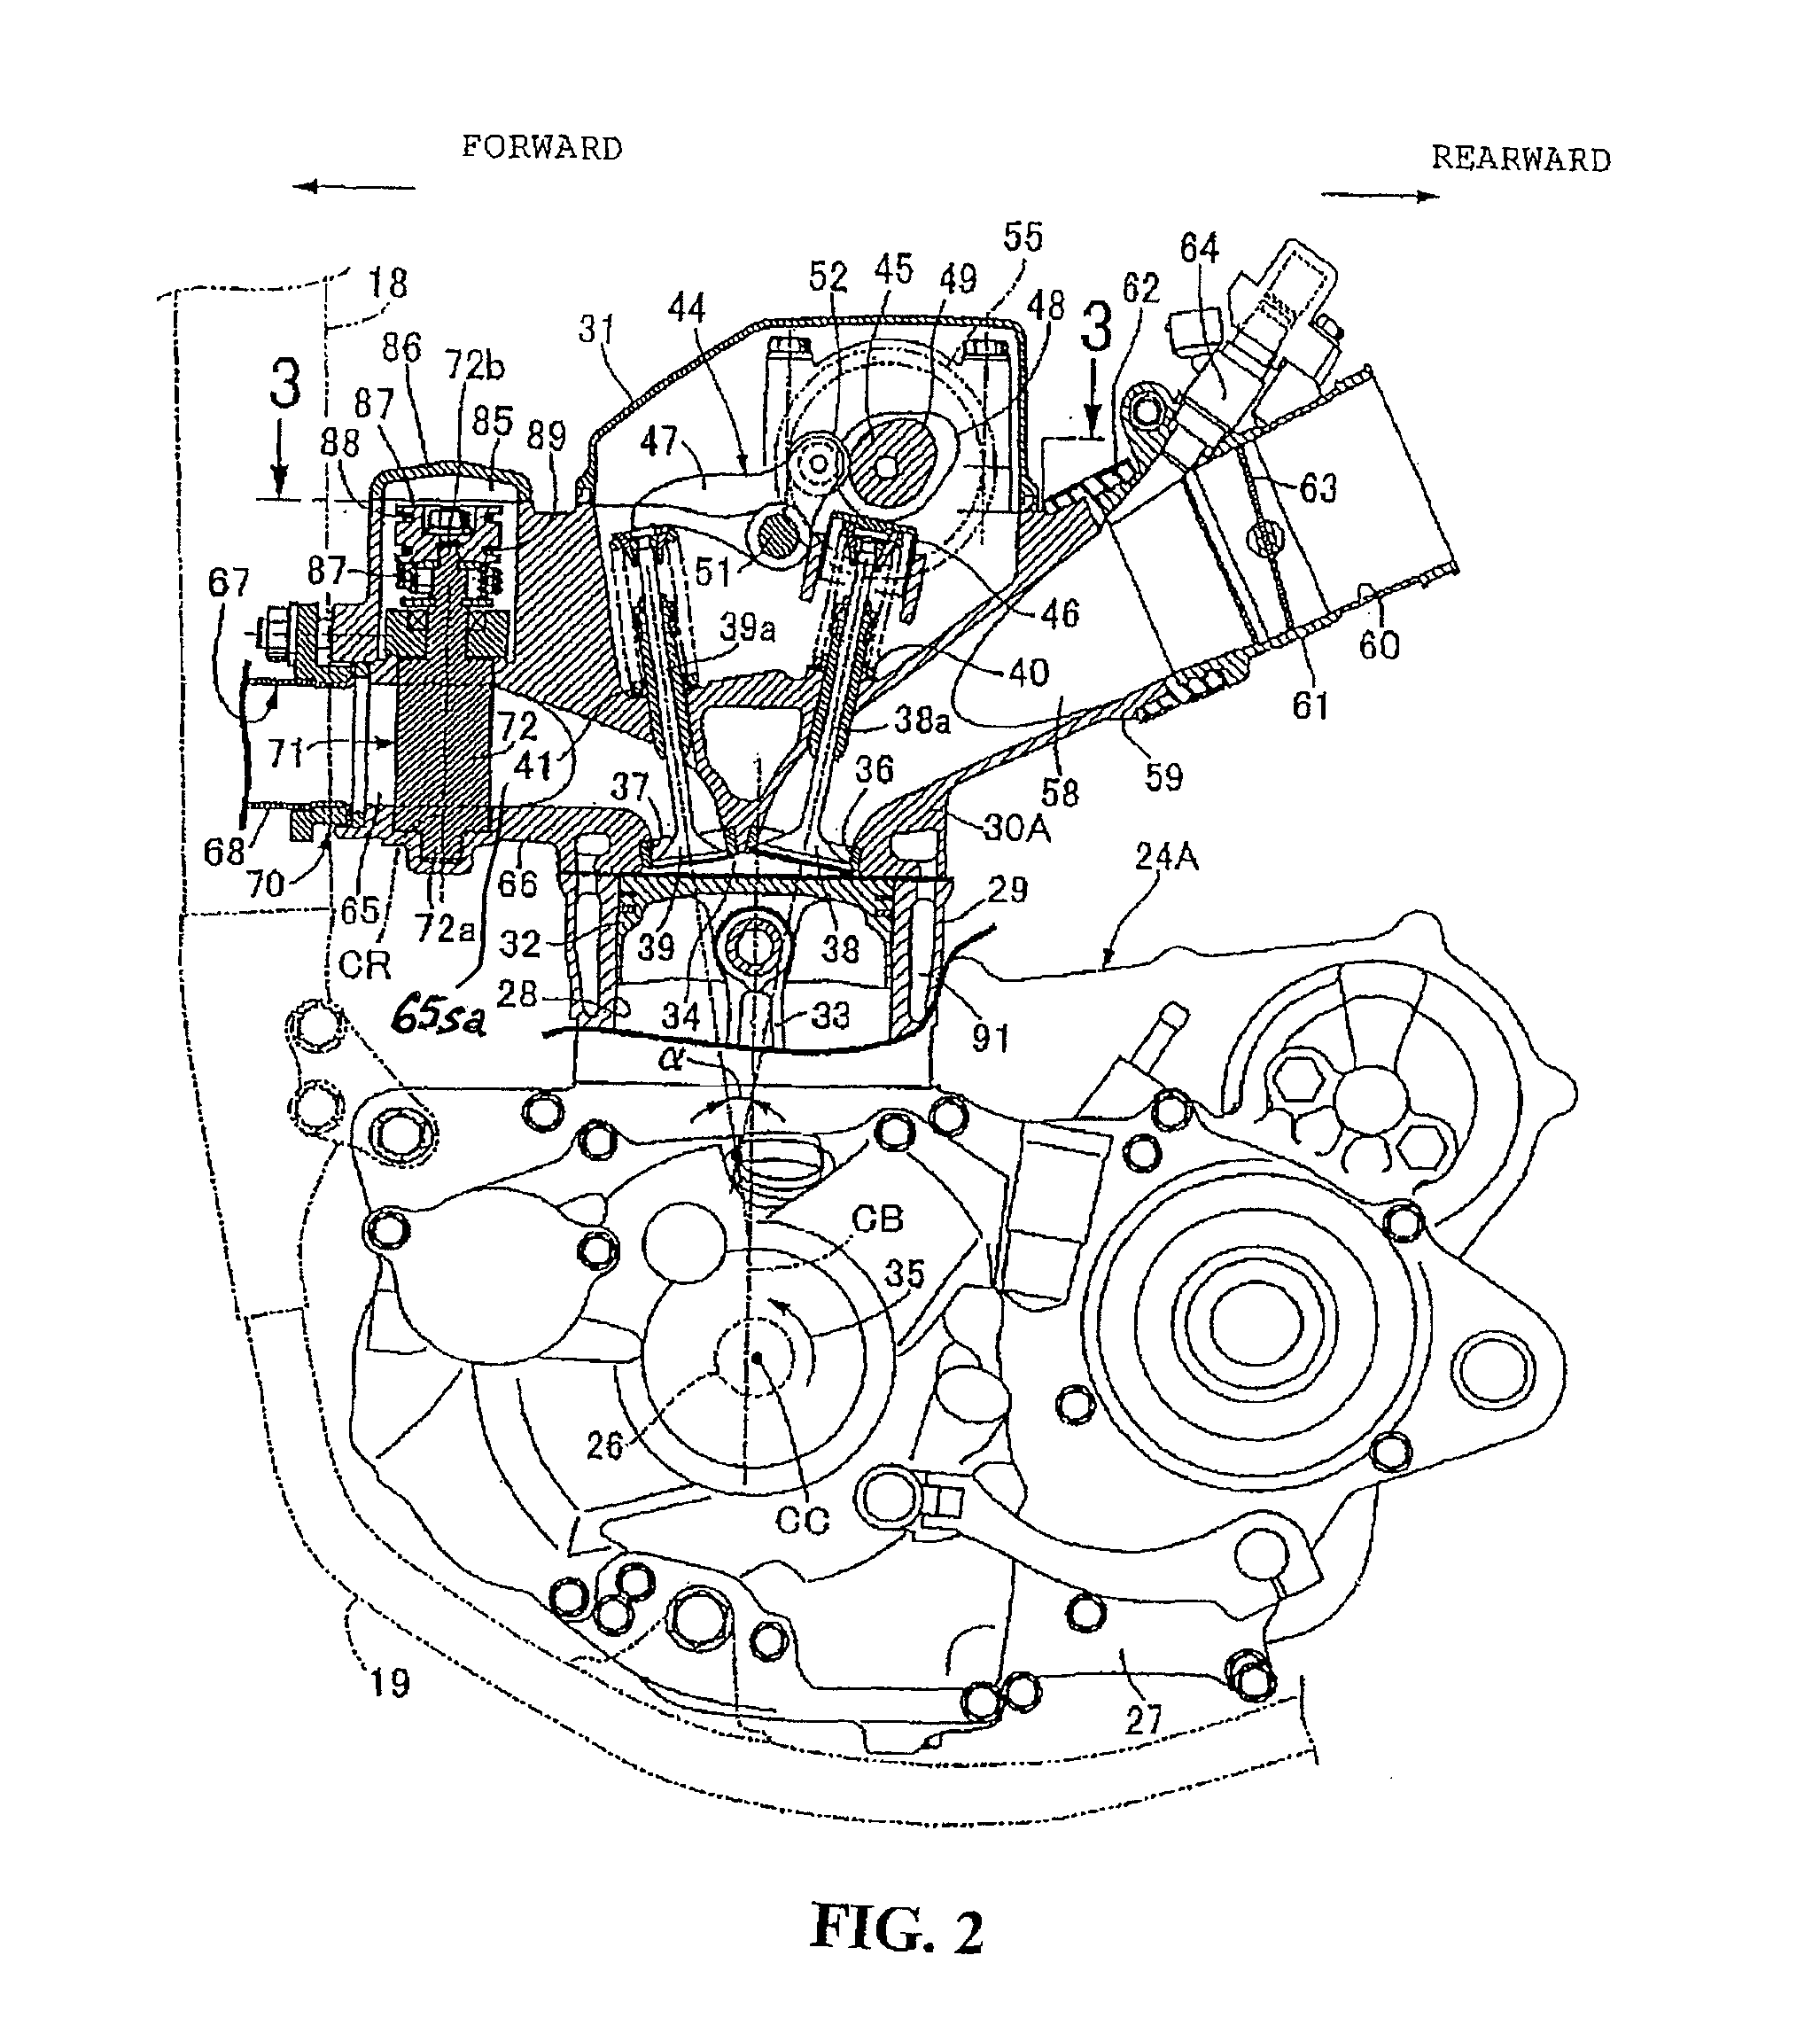 Exhaust control device for vehicle engine